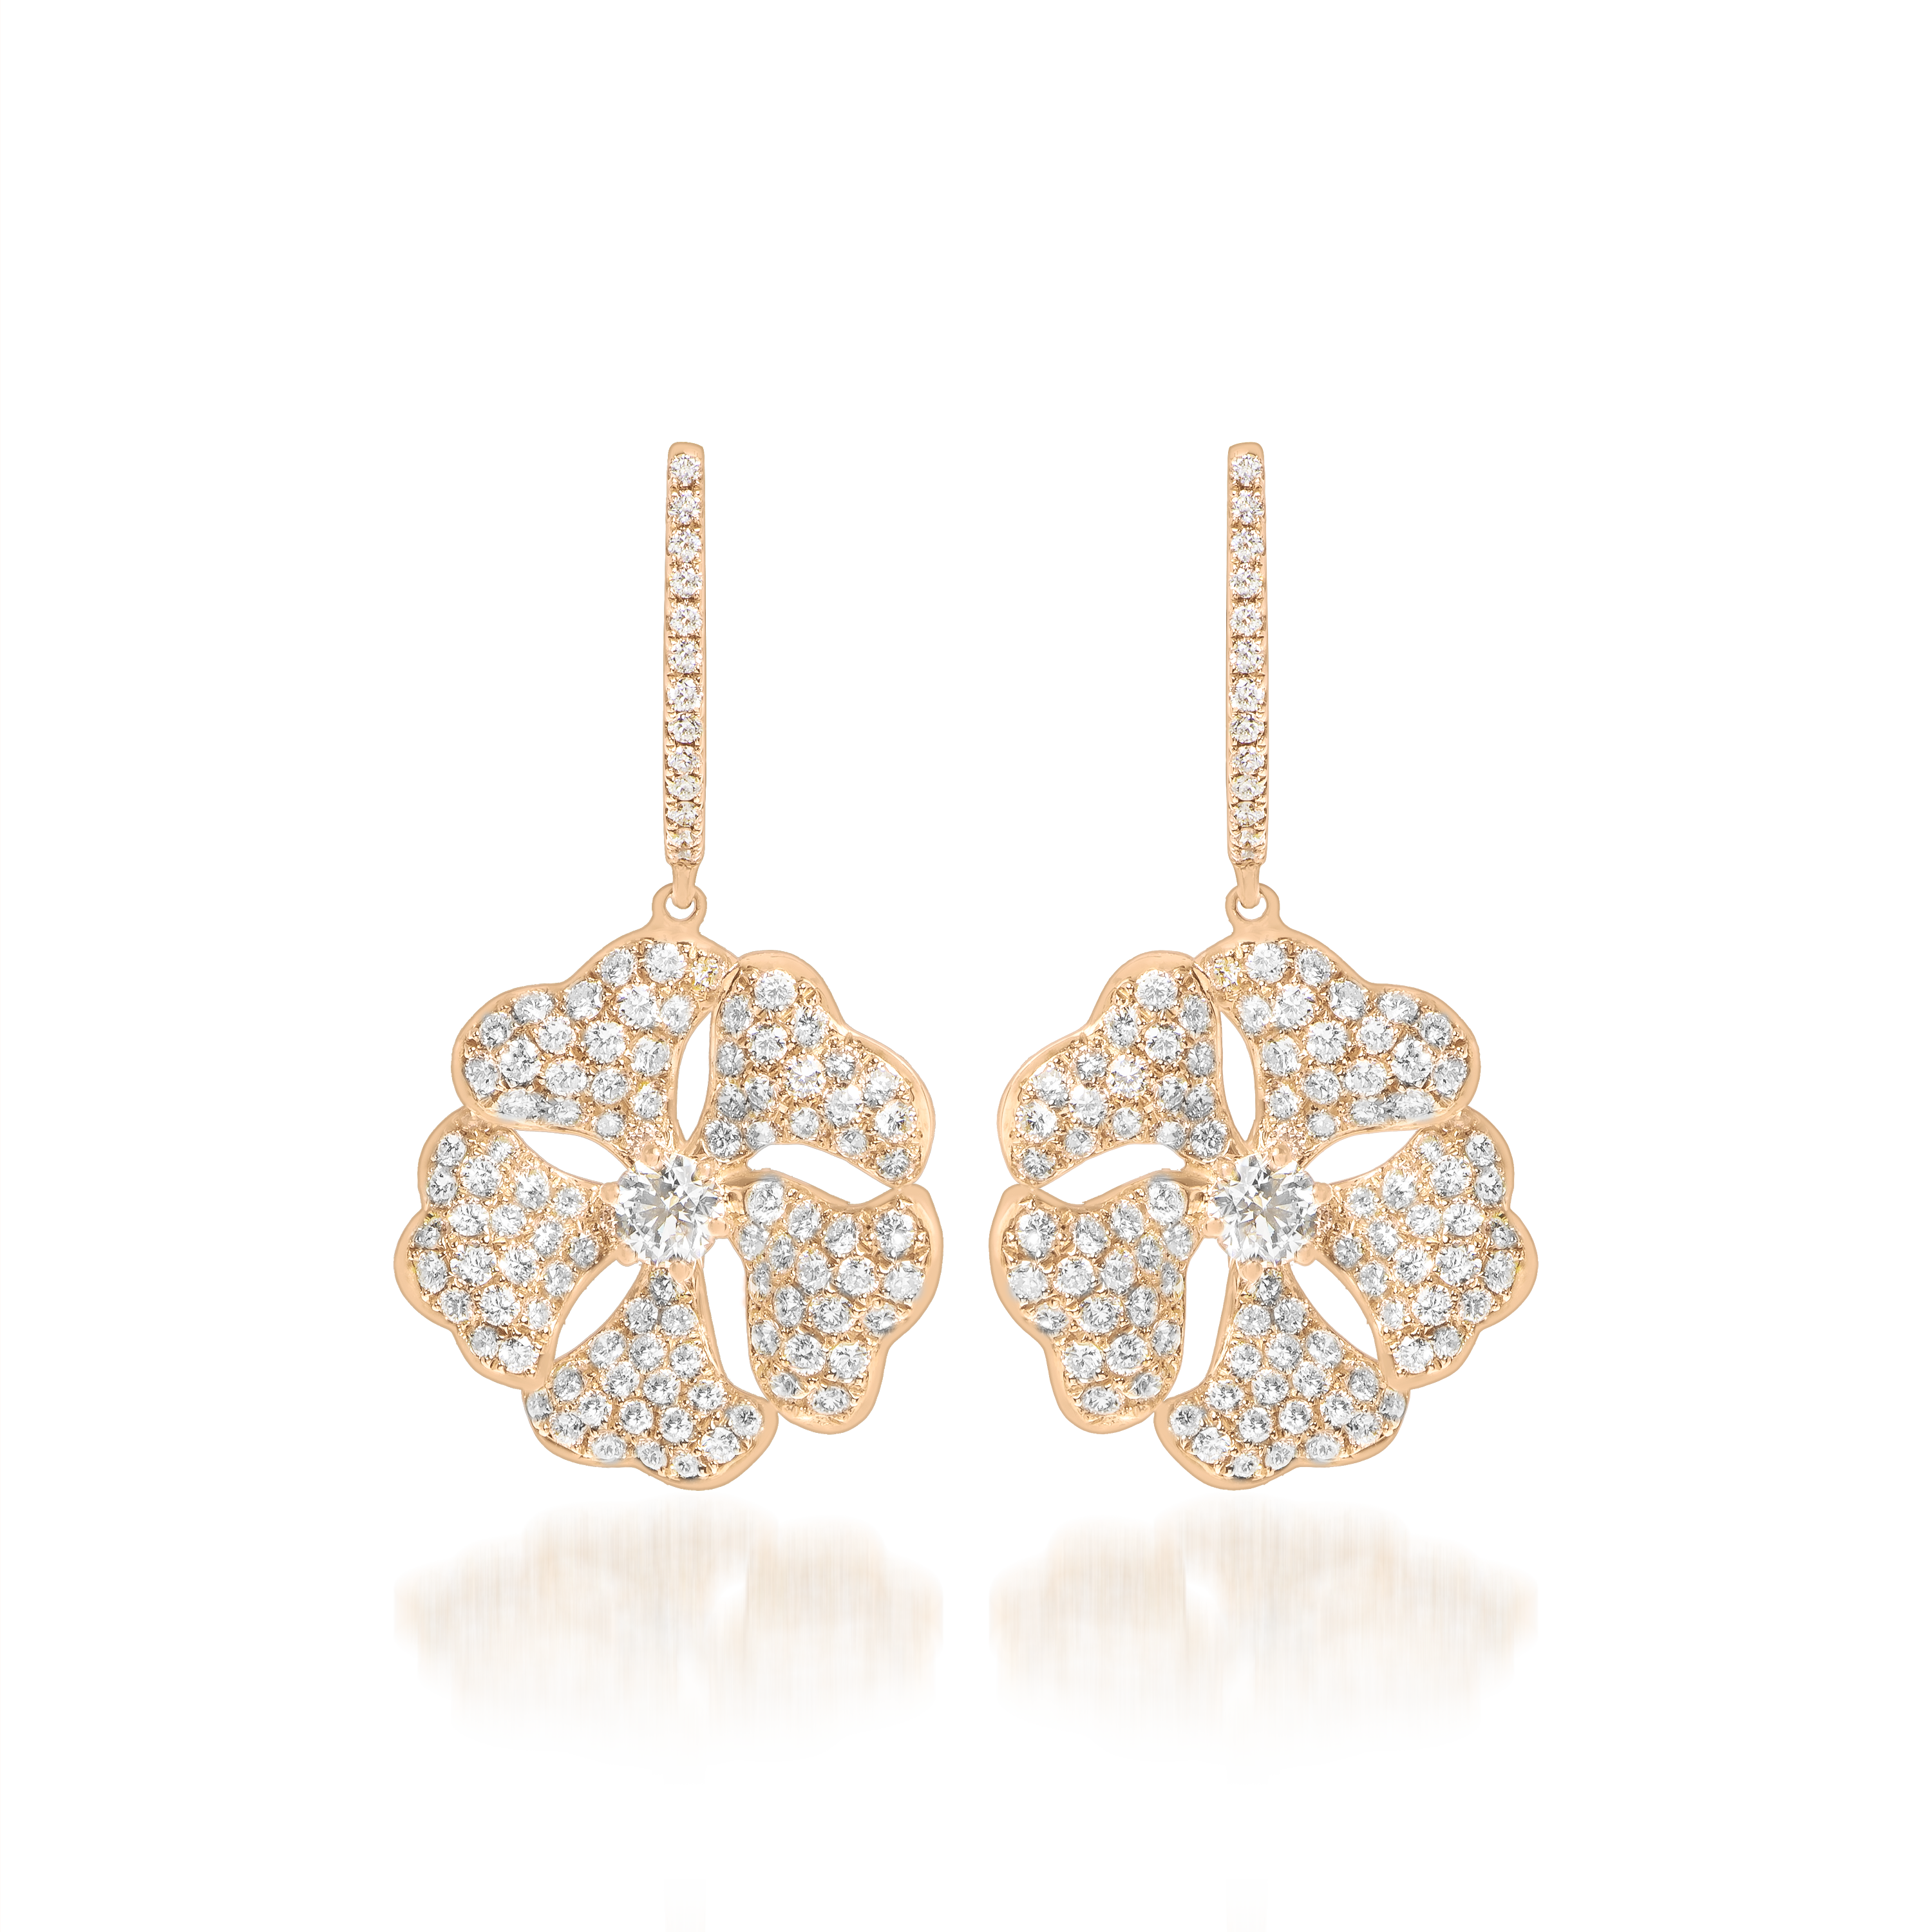 Bloom Gold and Pavé Diamond Drop Earrings In 18K Rose Gold